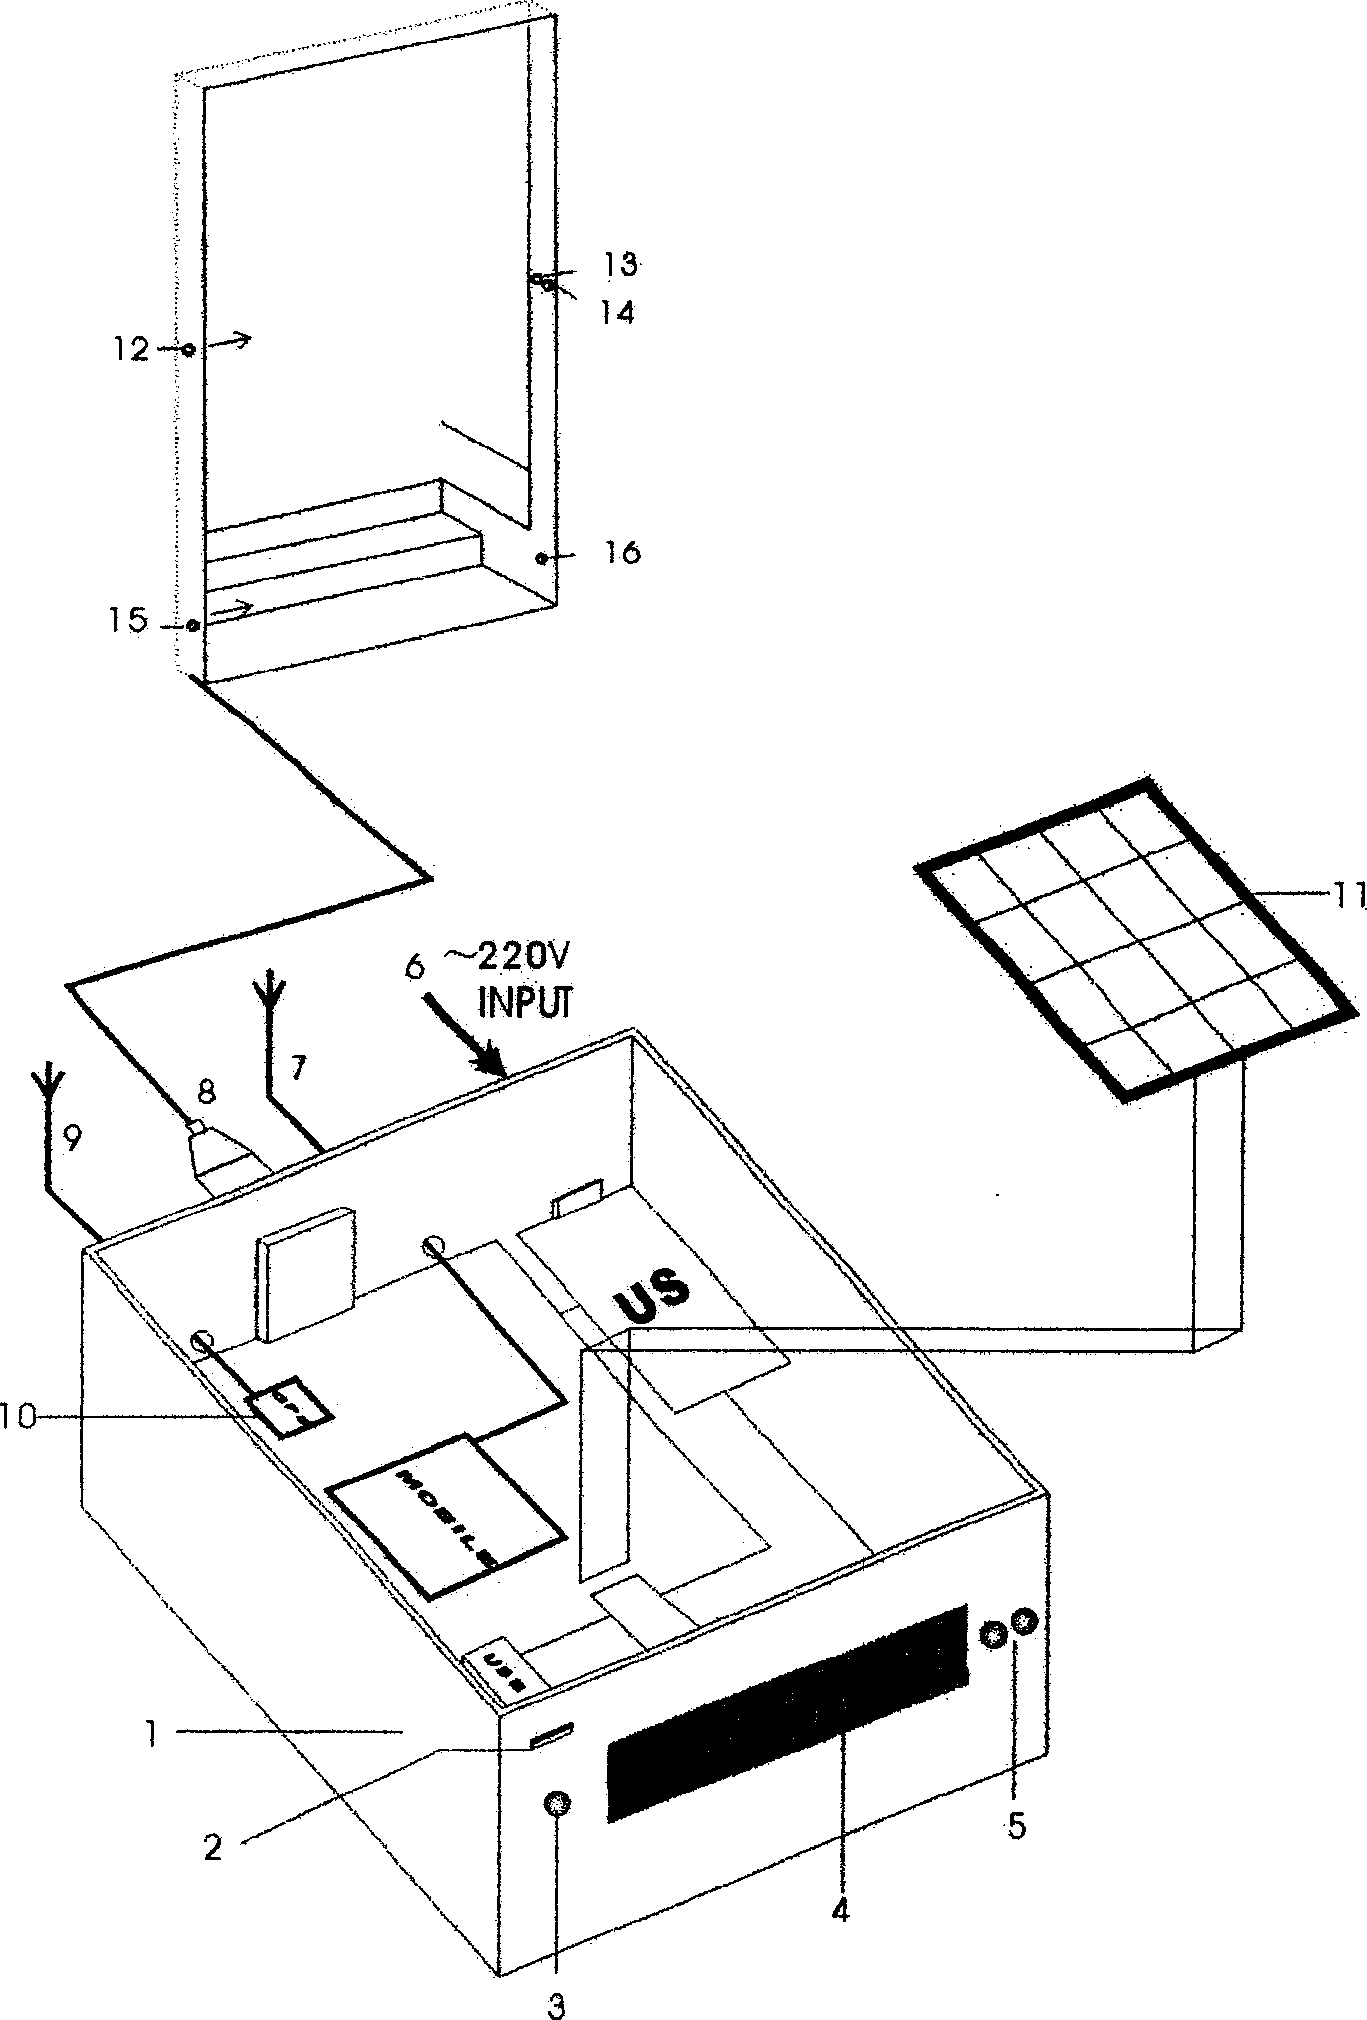 Collecting and treating device for passenger coach load information